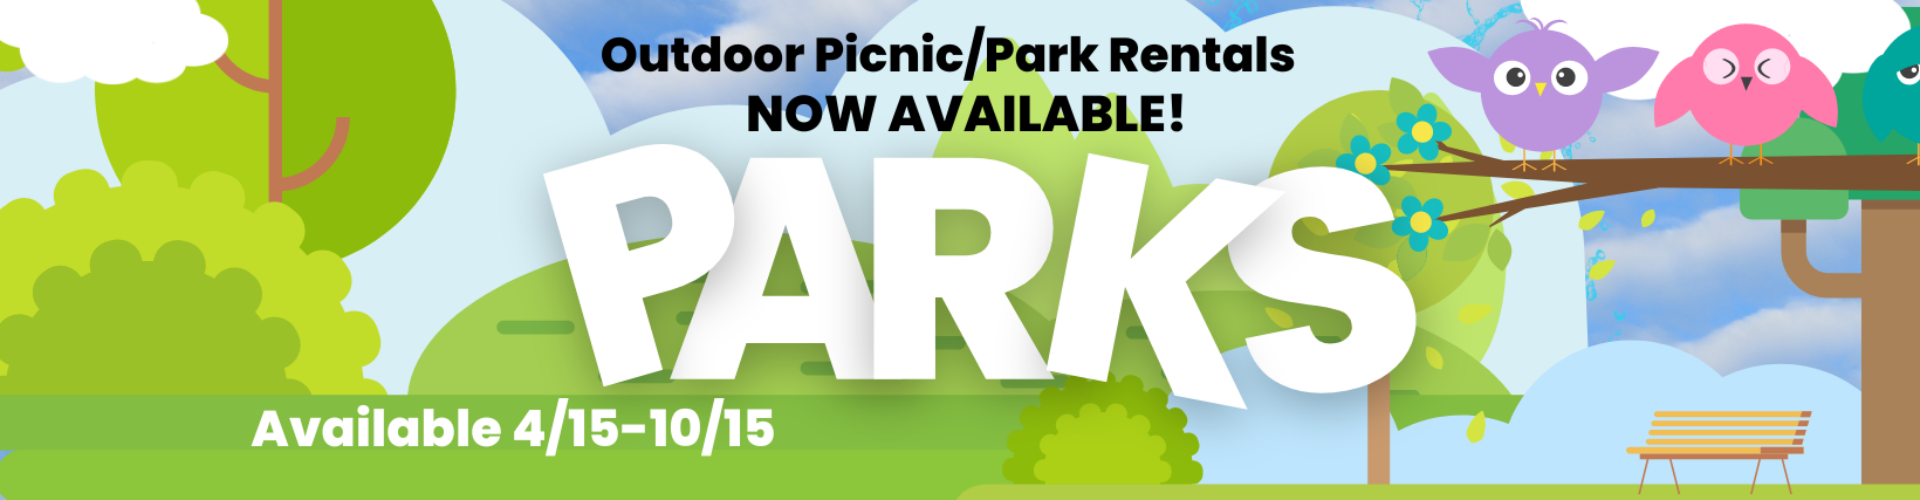 Outdoor picnic/park rentals are now available! Available 4/15-10/15